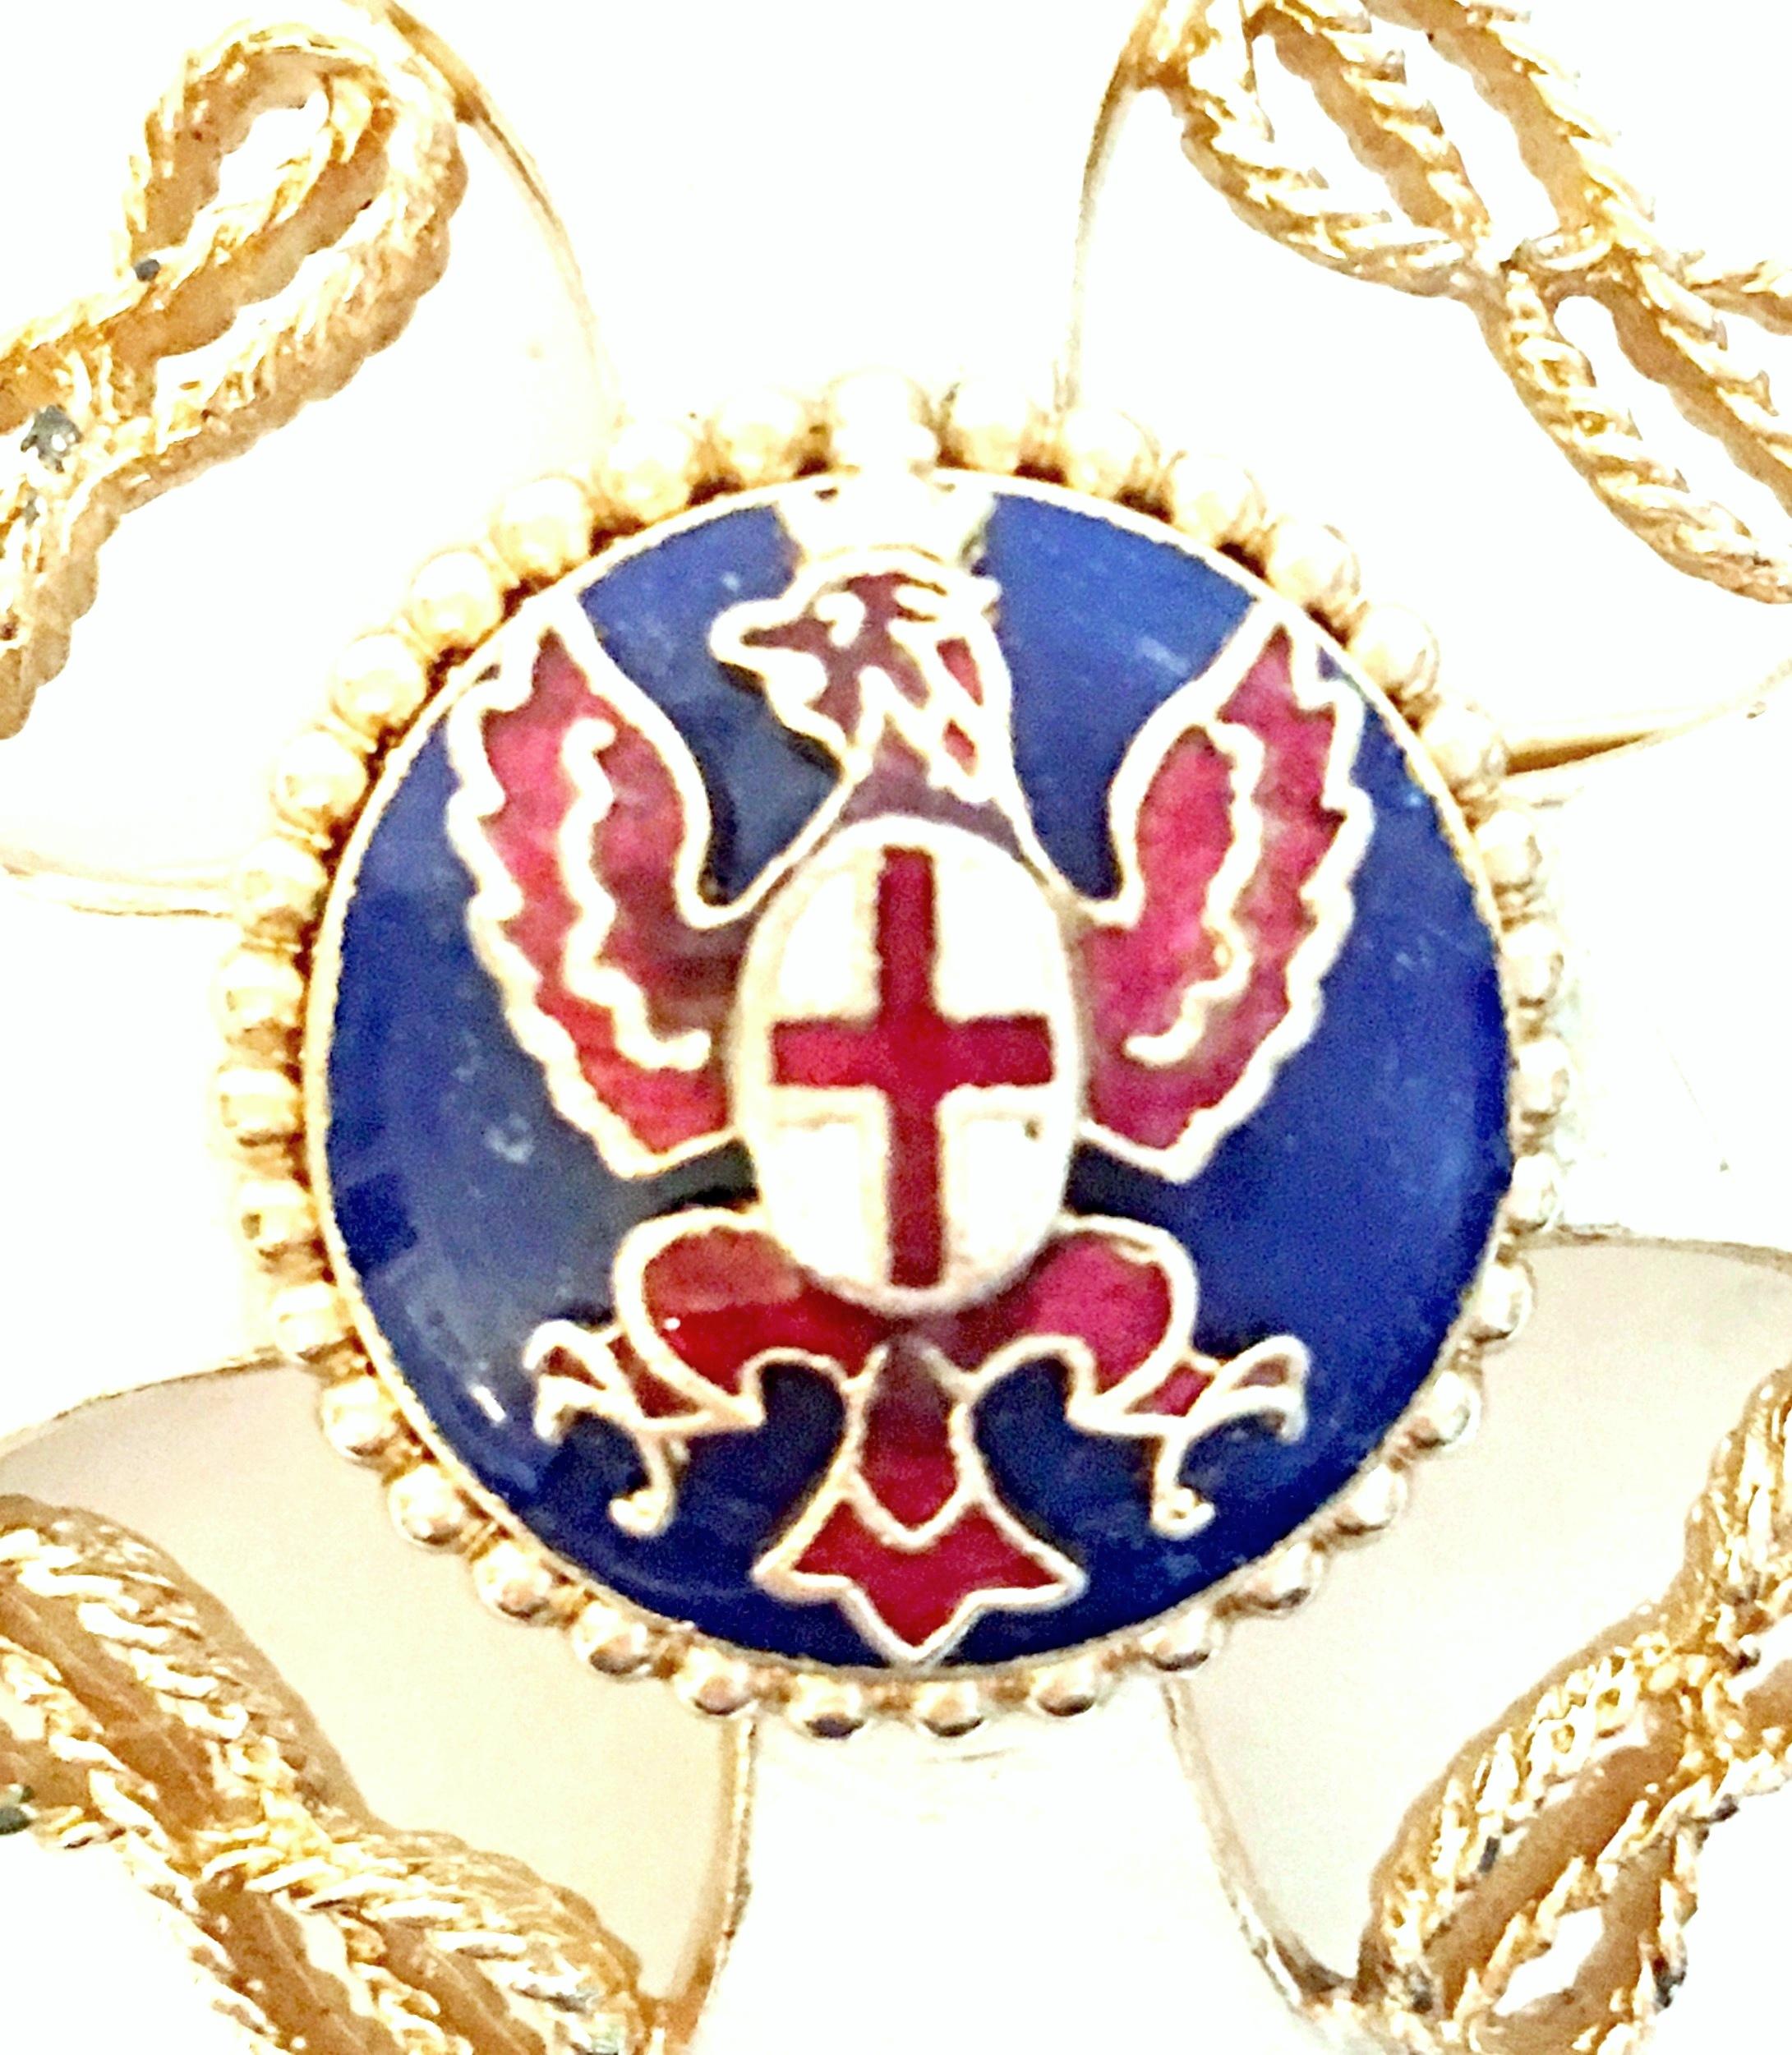 20th Century Gold & Enamel Crest Cross Brooch &Pendant Necklace By, Monet For Sale 5